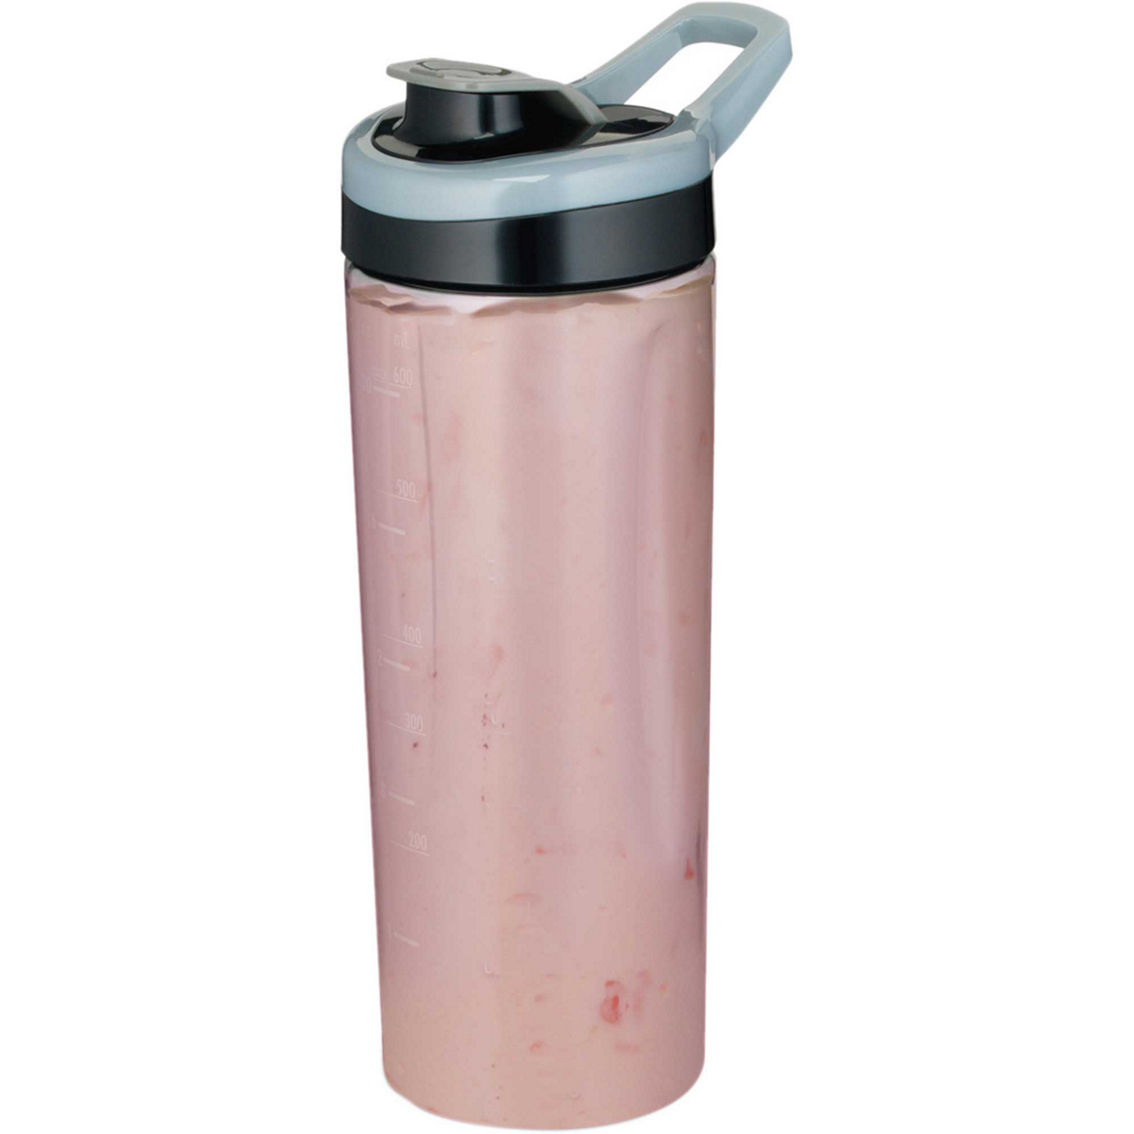 Hamilton Beach Wave Crusher Blender with Blend-in Travel Jar - Image 3 of 4